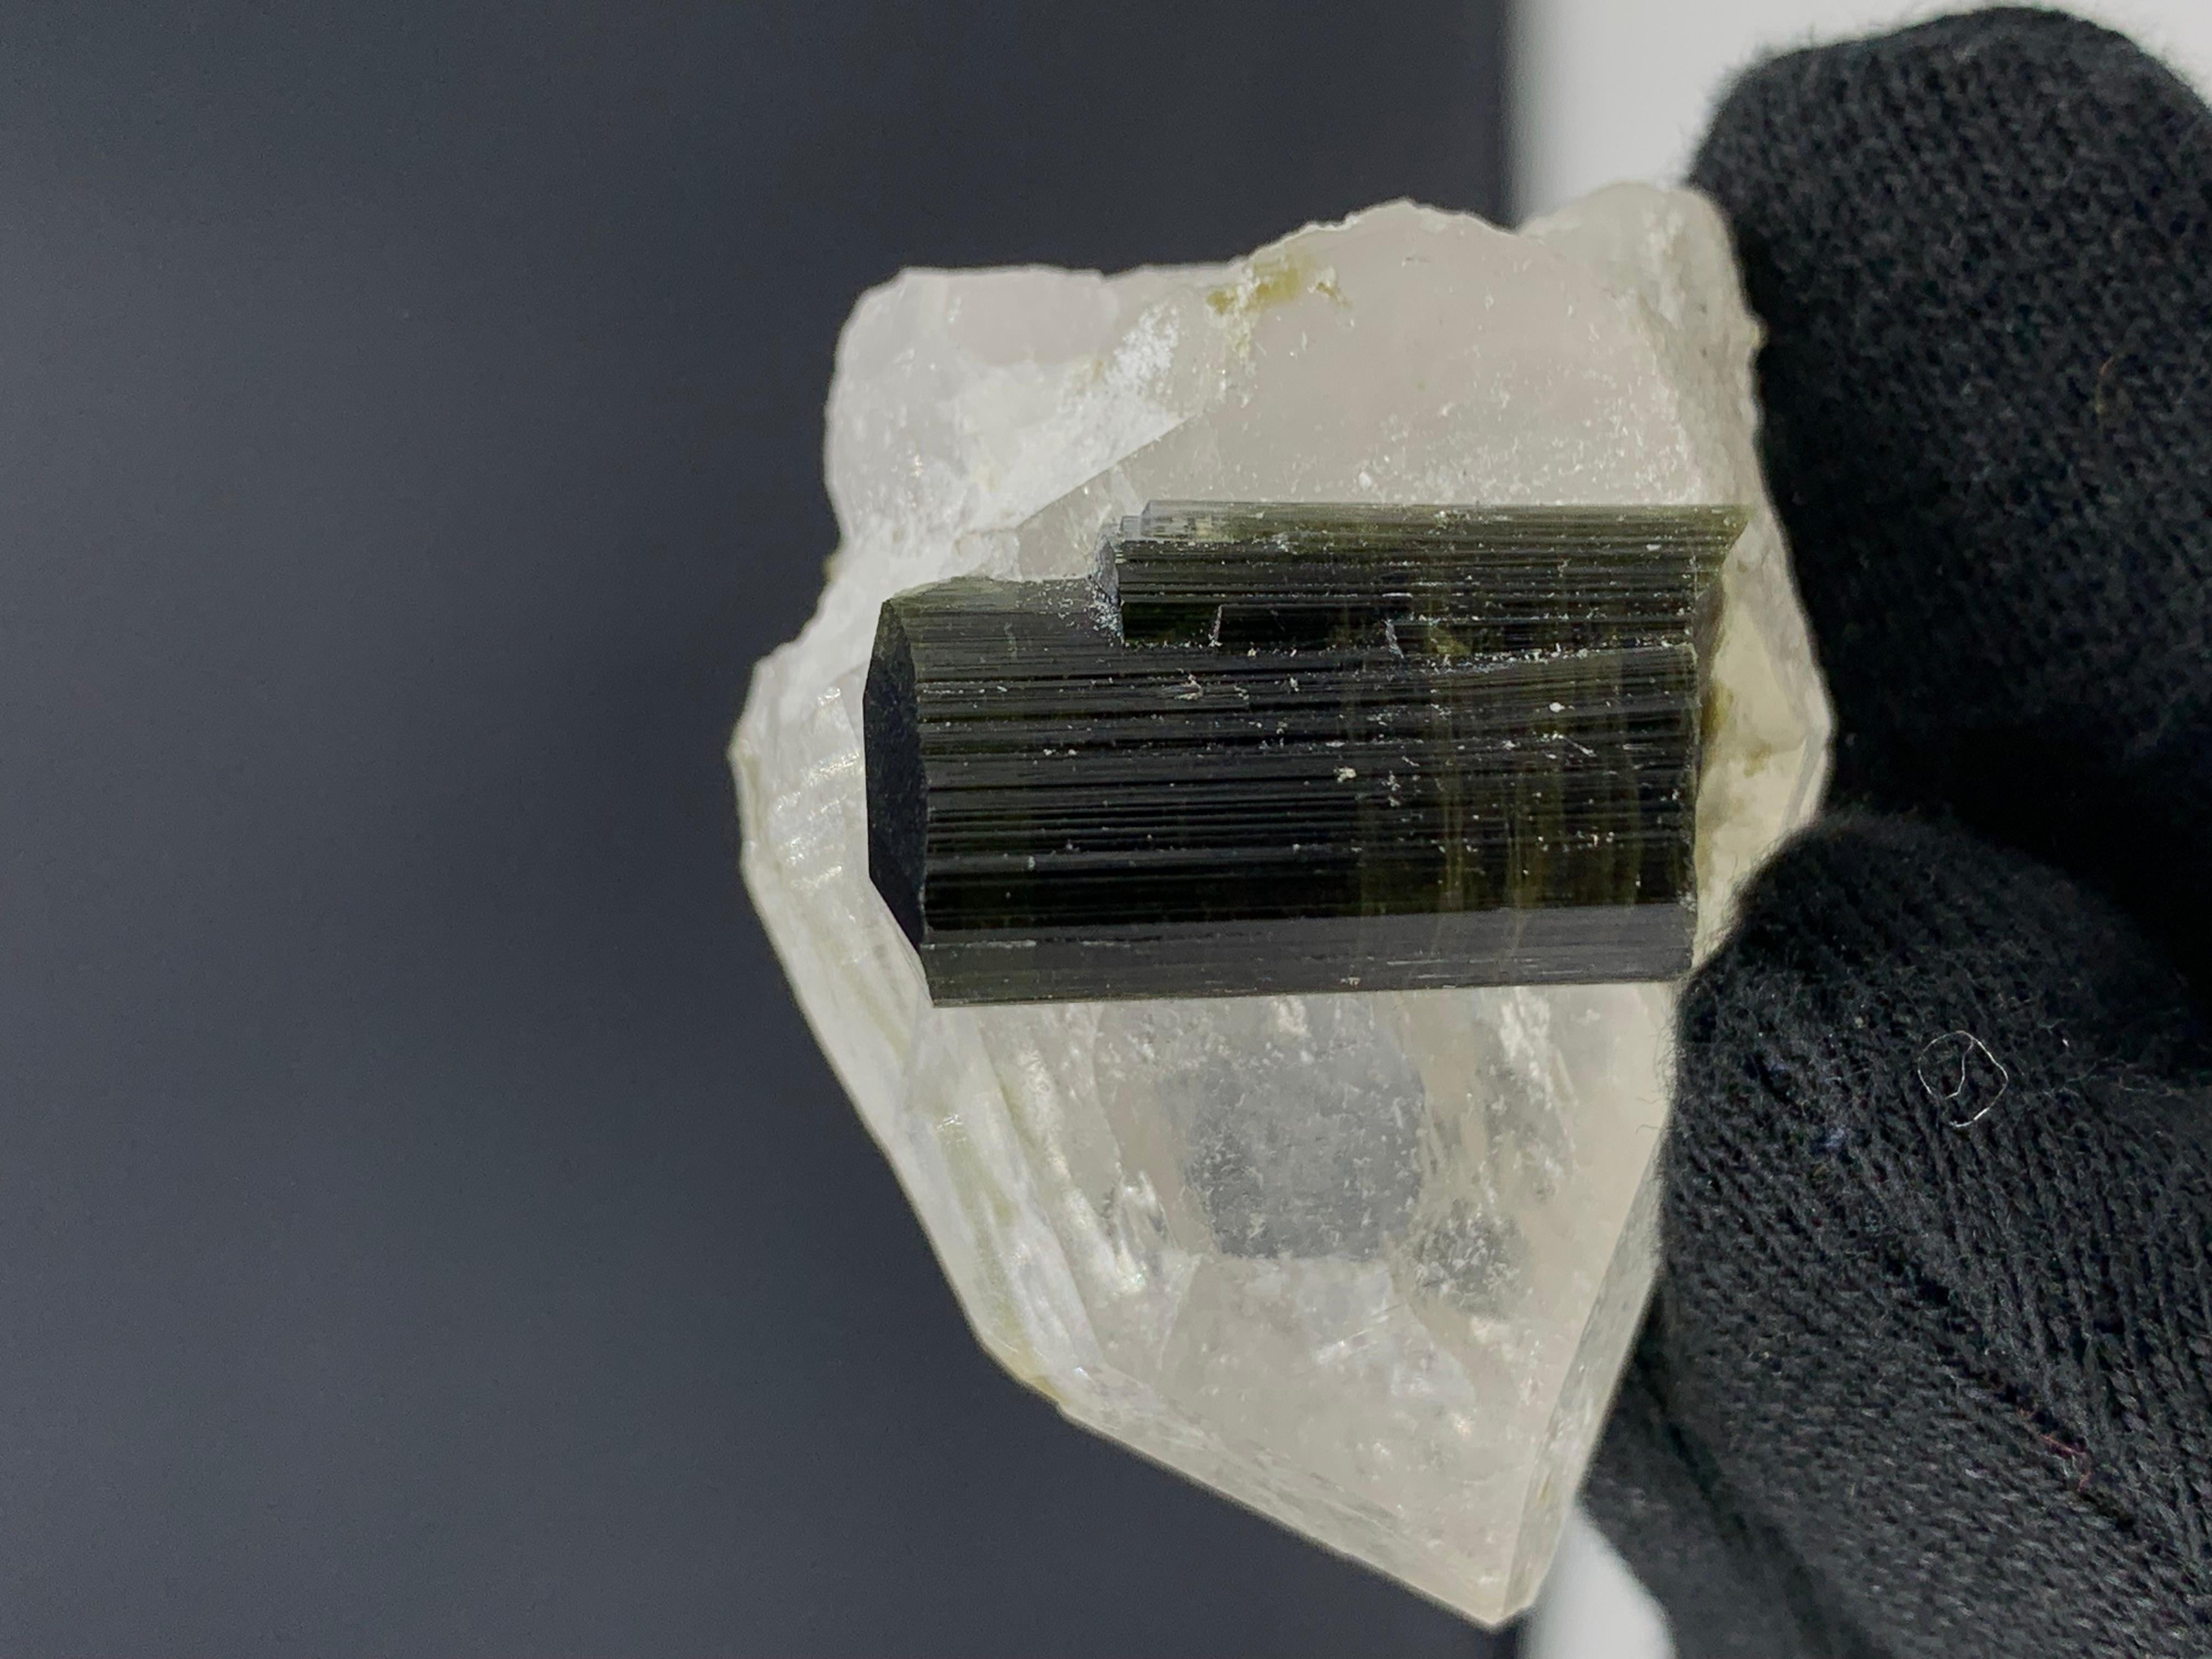 33.77 Gram Adorable Green Tourmaline Specimen From Stak Nala, Gilgit, Pakistan 
Weight: 33.77 Gram
Dimension: 3.2 x 3.9 x 2.6 Cm 
Origin: Stak Nala, Gilgit Baltistan, Pakistan 

Tourmaline is a crystalline silicate mineral group in which boron is